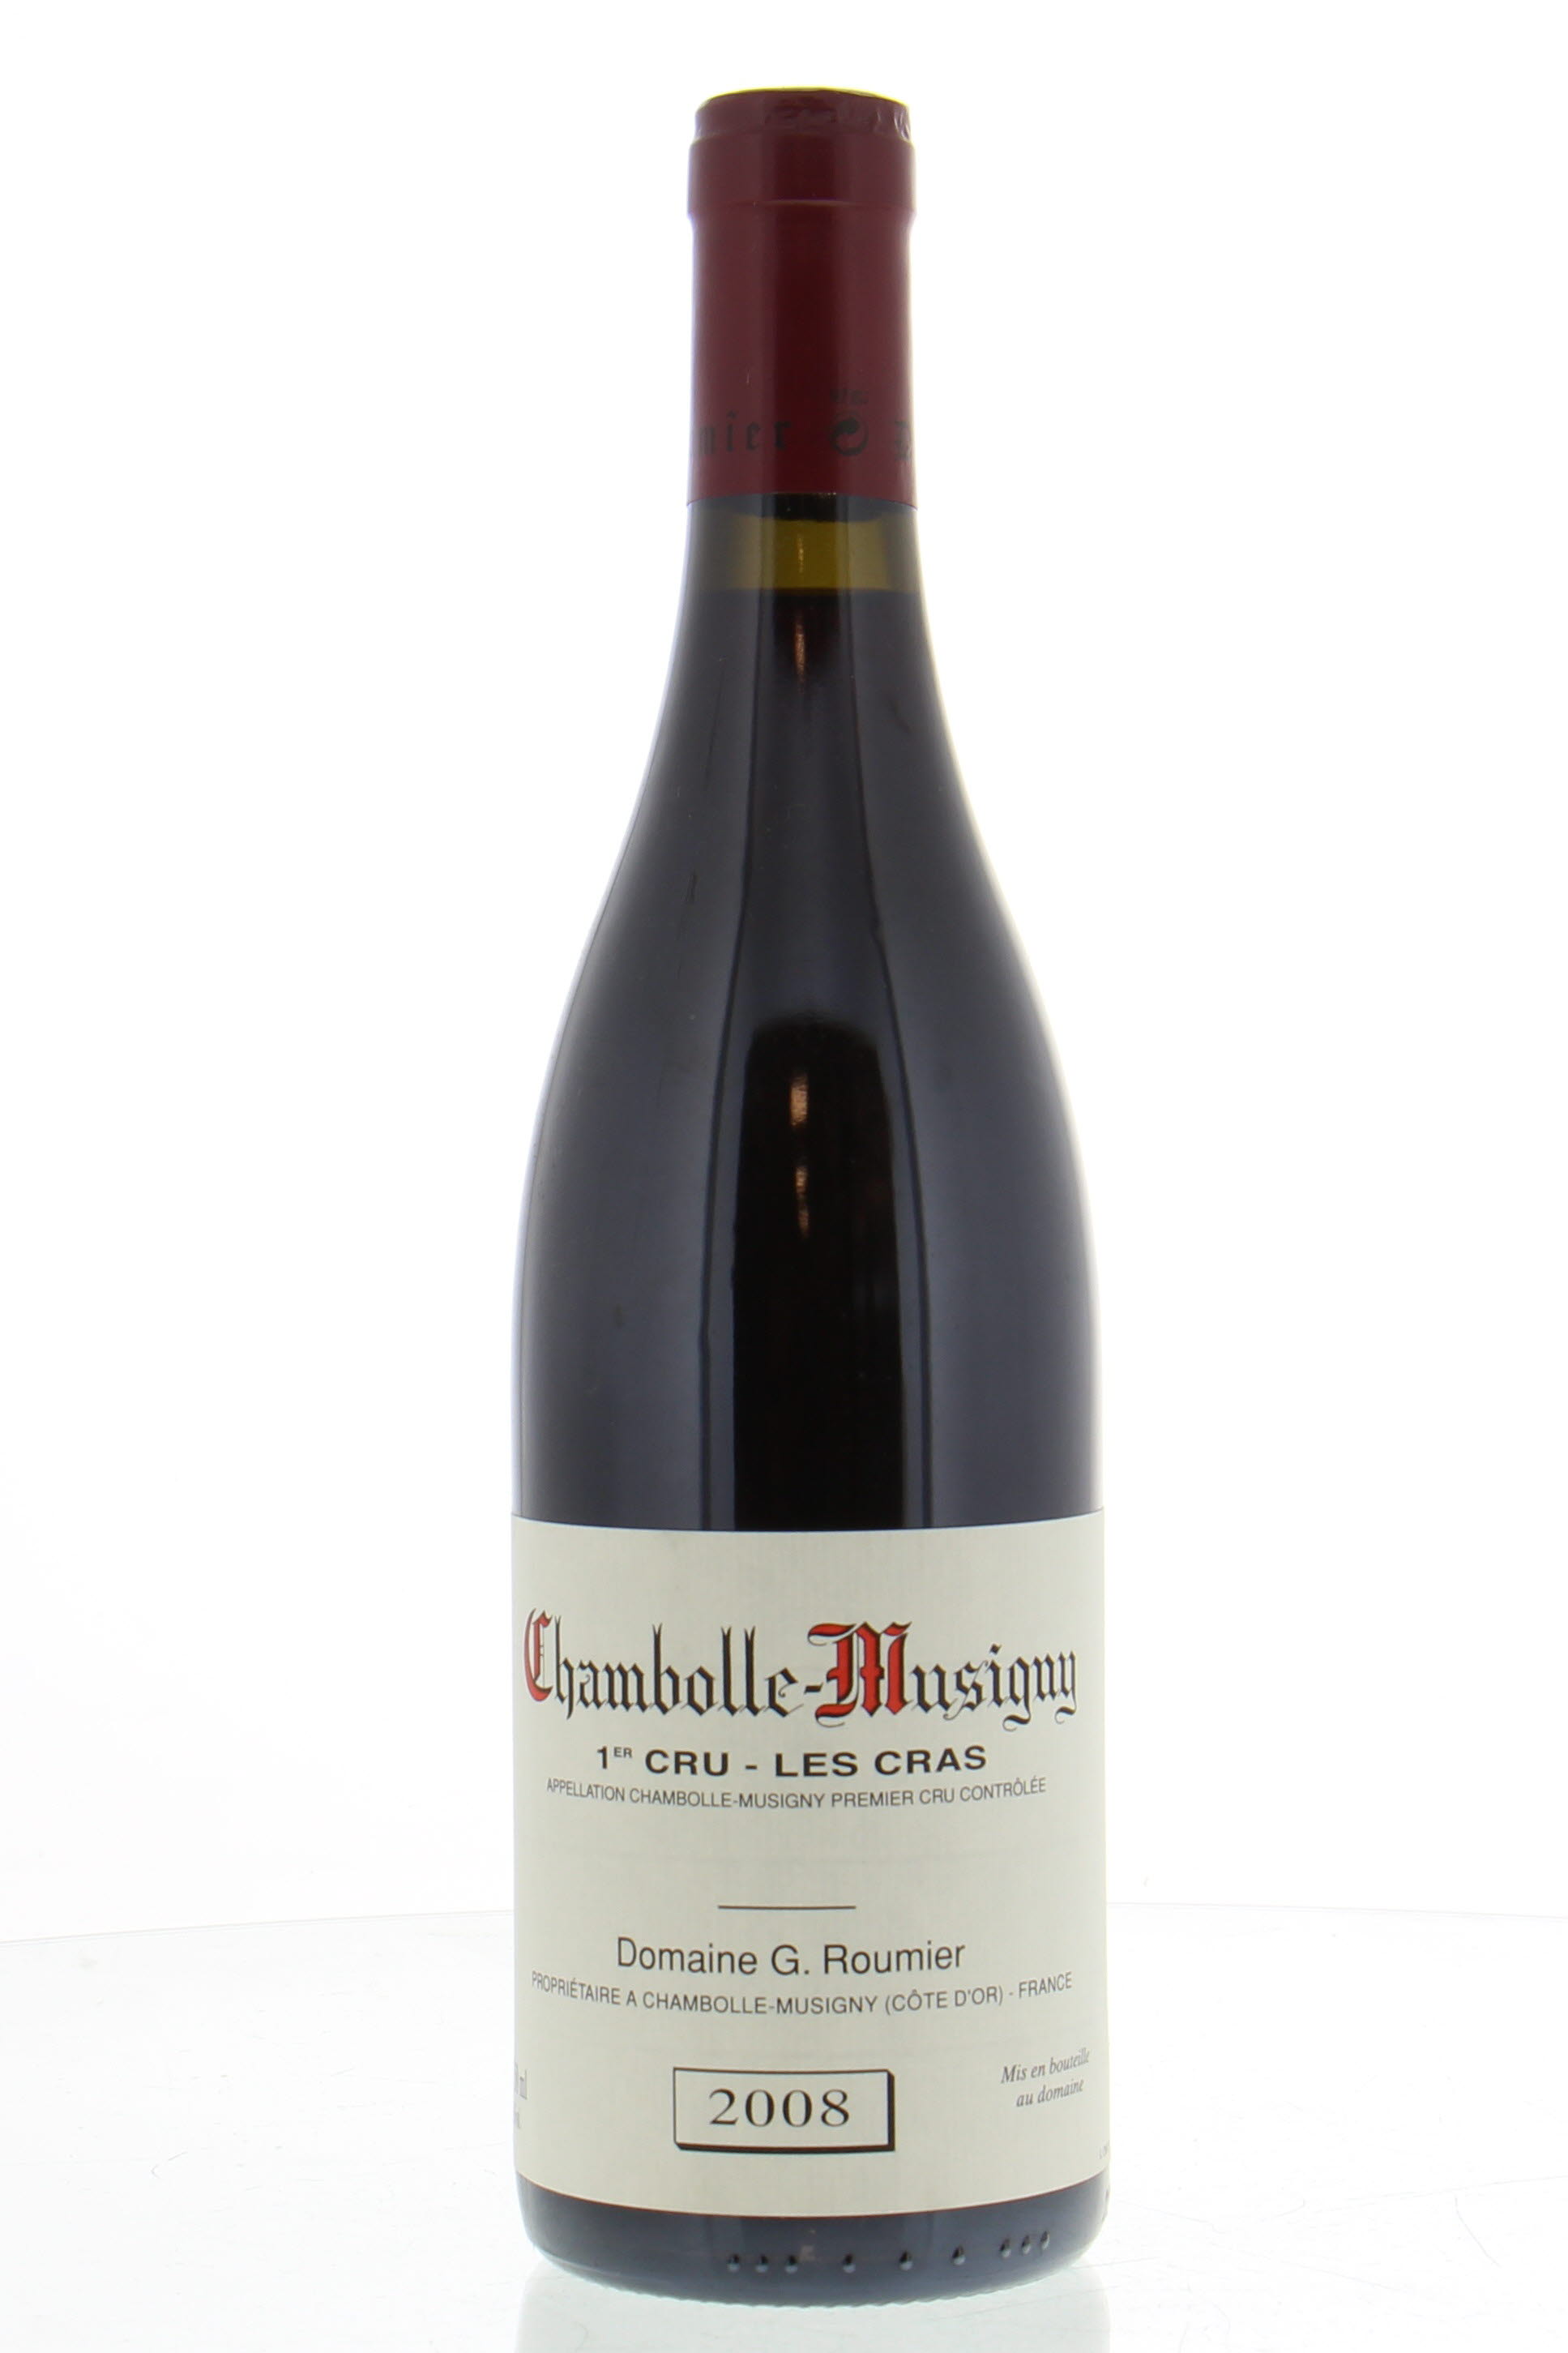 Georges Roumier - Chambolle Musigny les Cras 1cru 2008